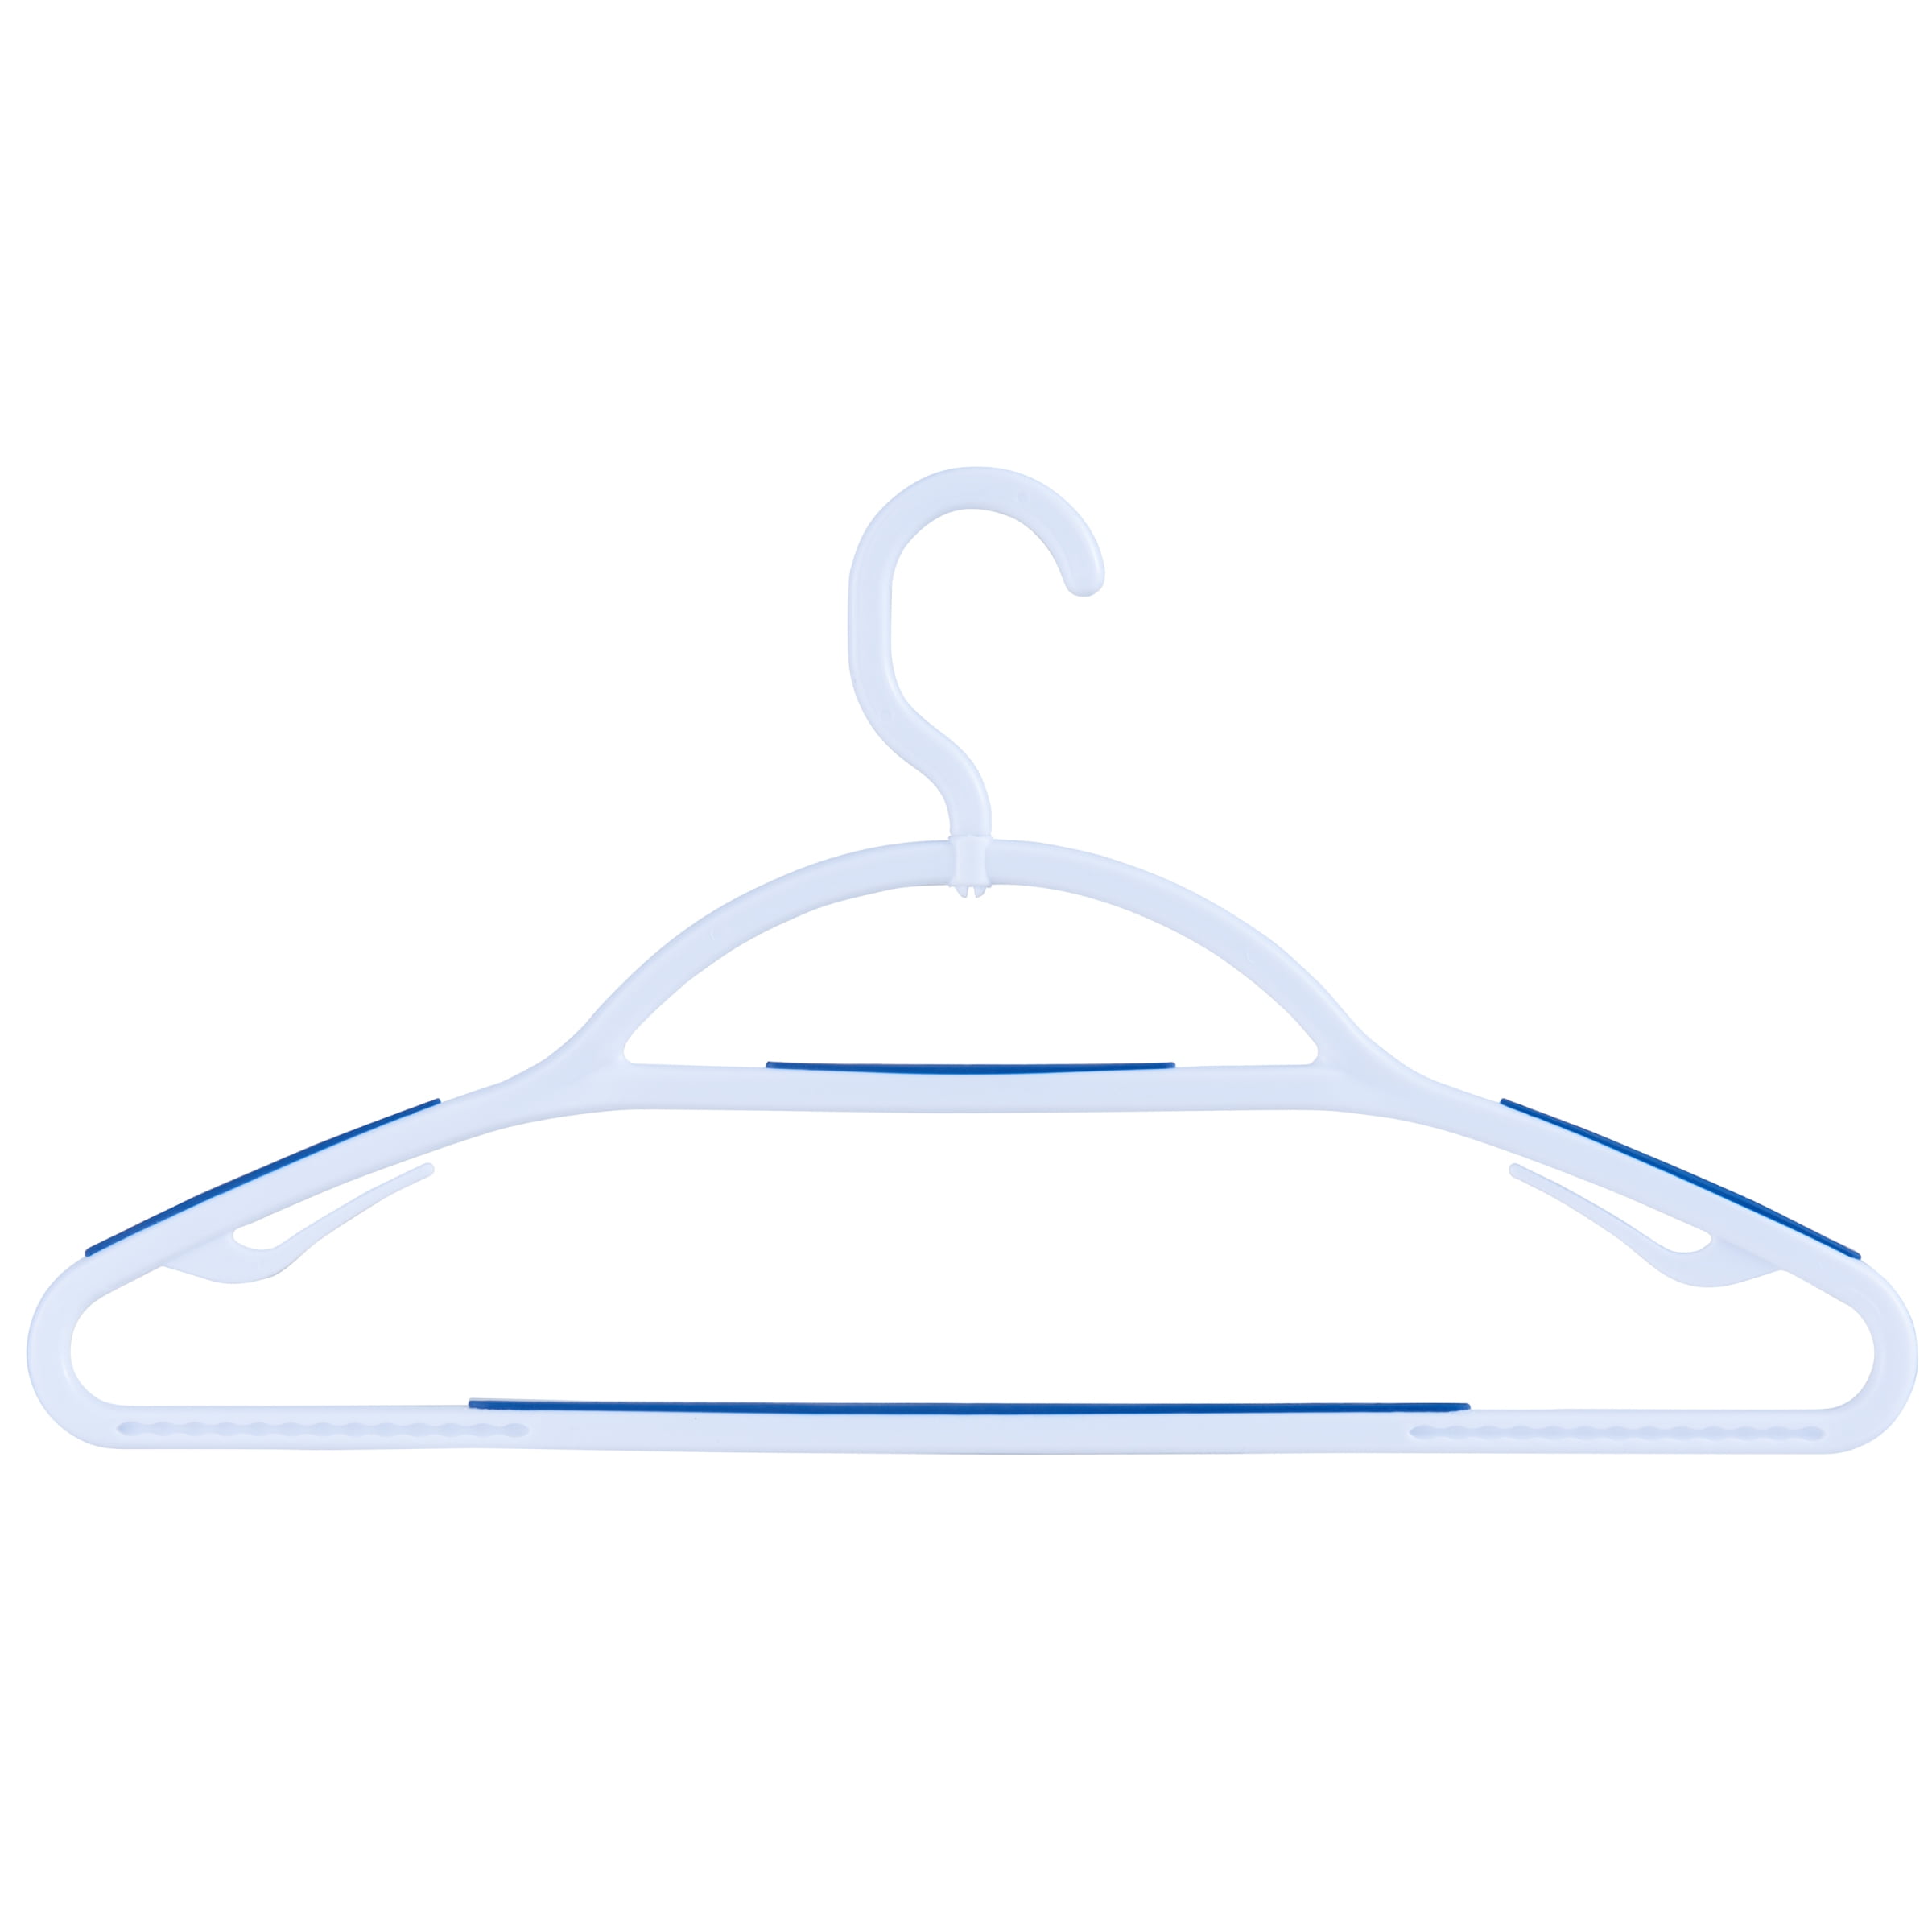 Mainstays Slim Clothes Hangers, 10 Pack, White, Durable Plastic